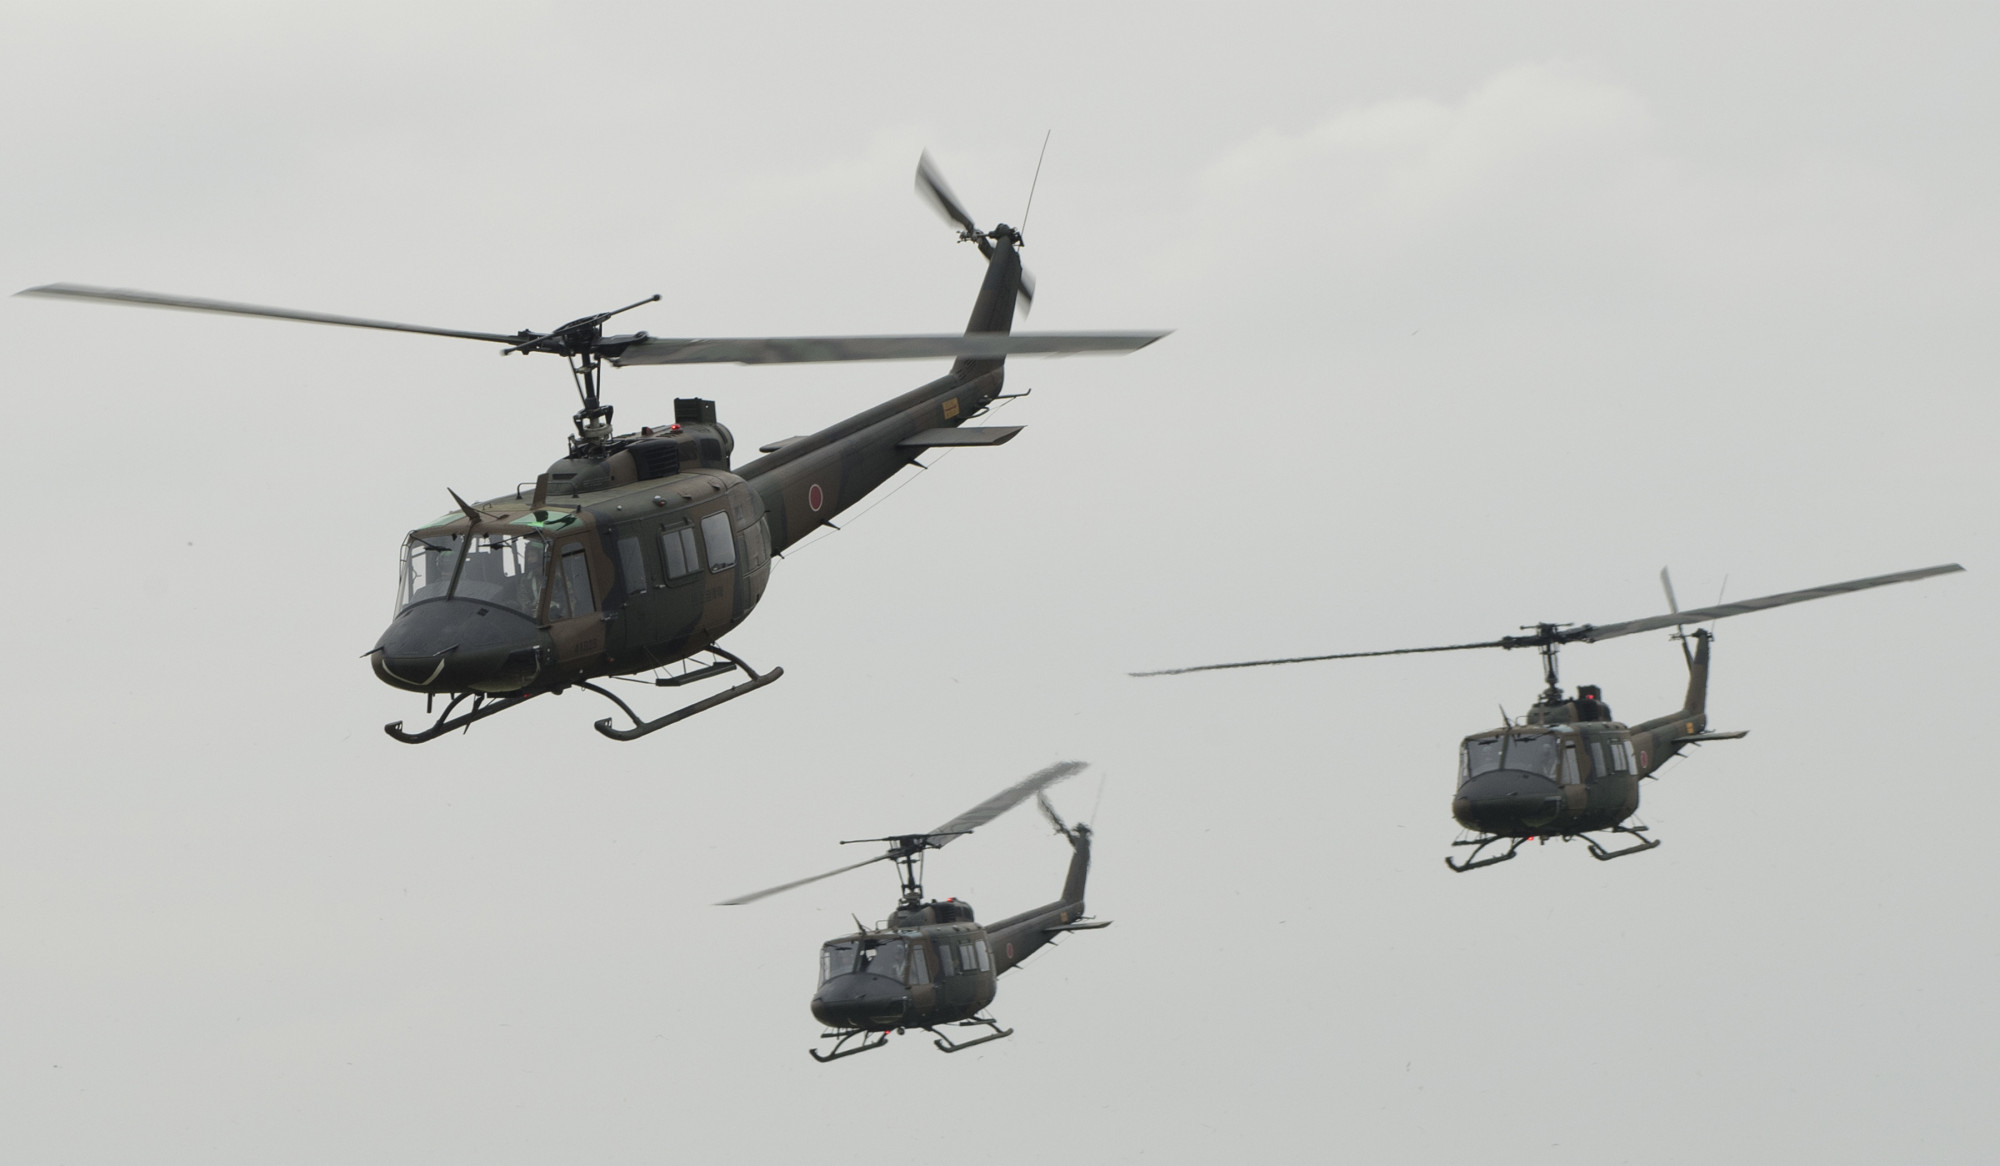 Japan’s Fuji-Bell UH-1J utility helicopters